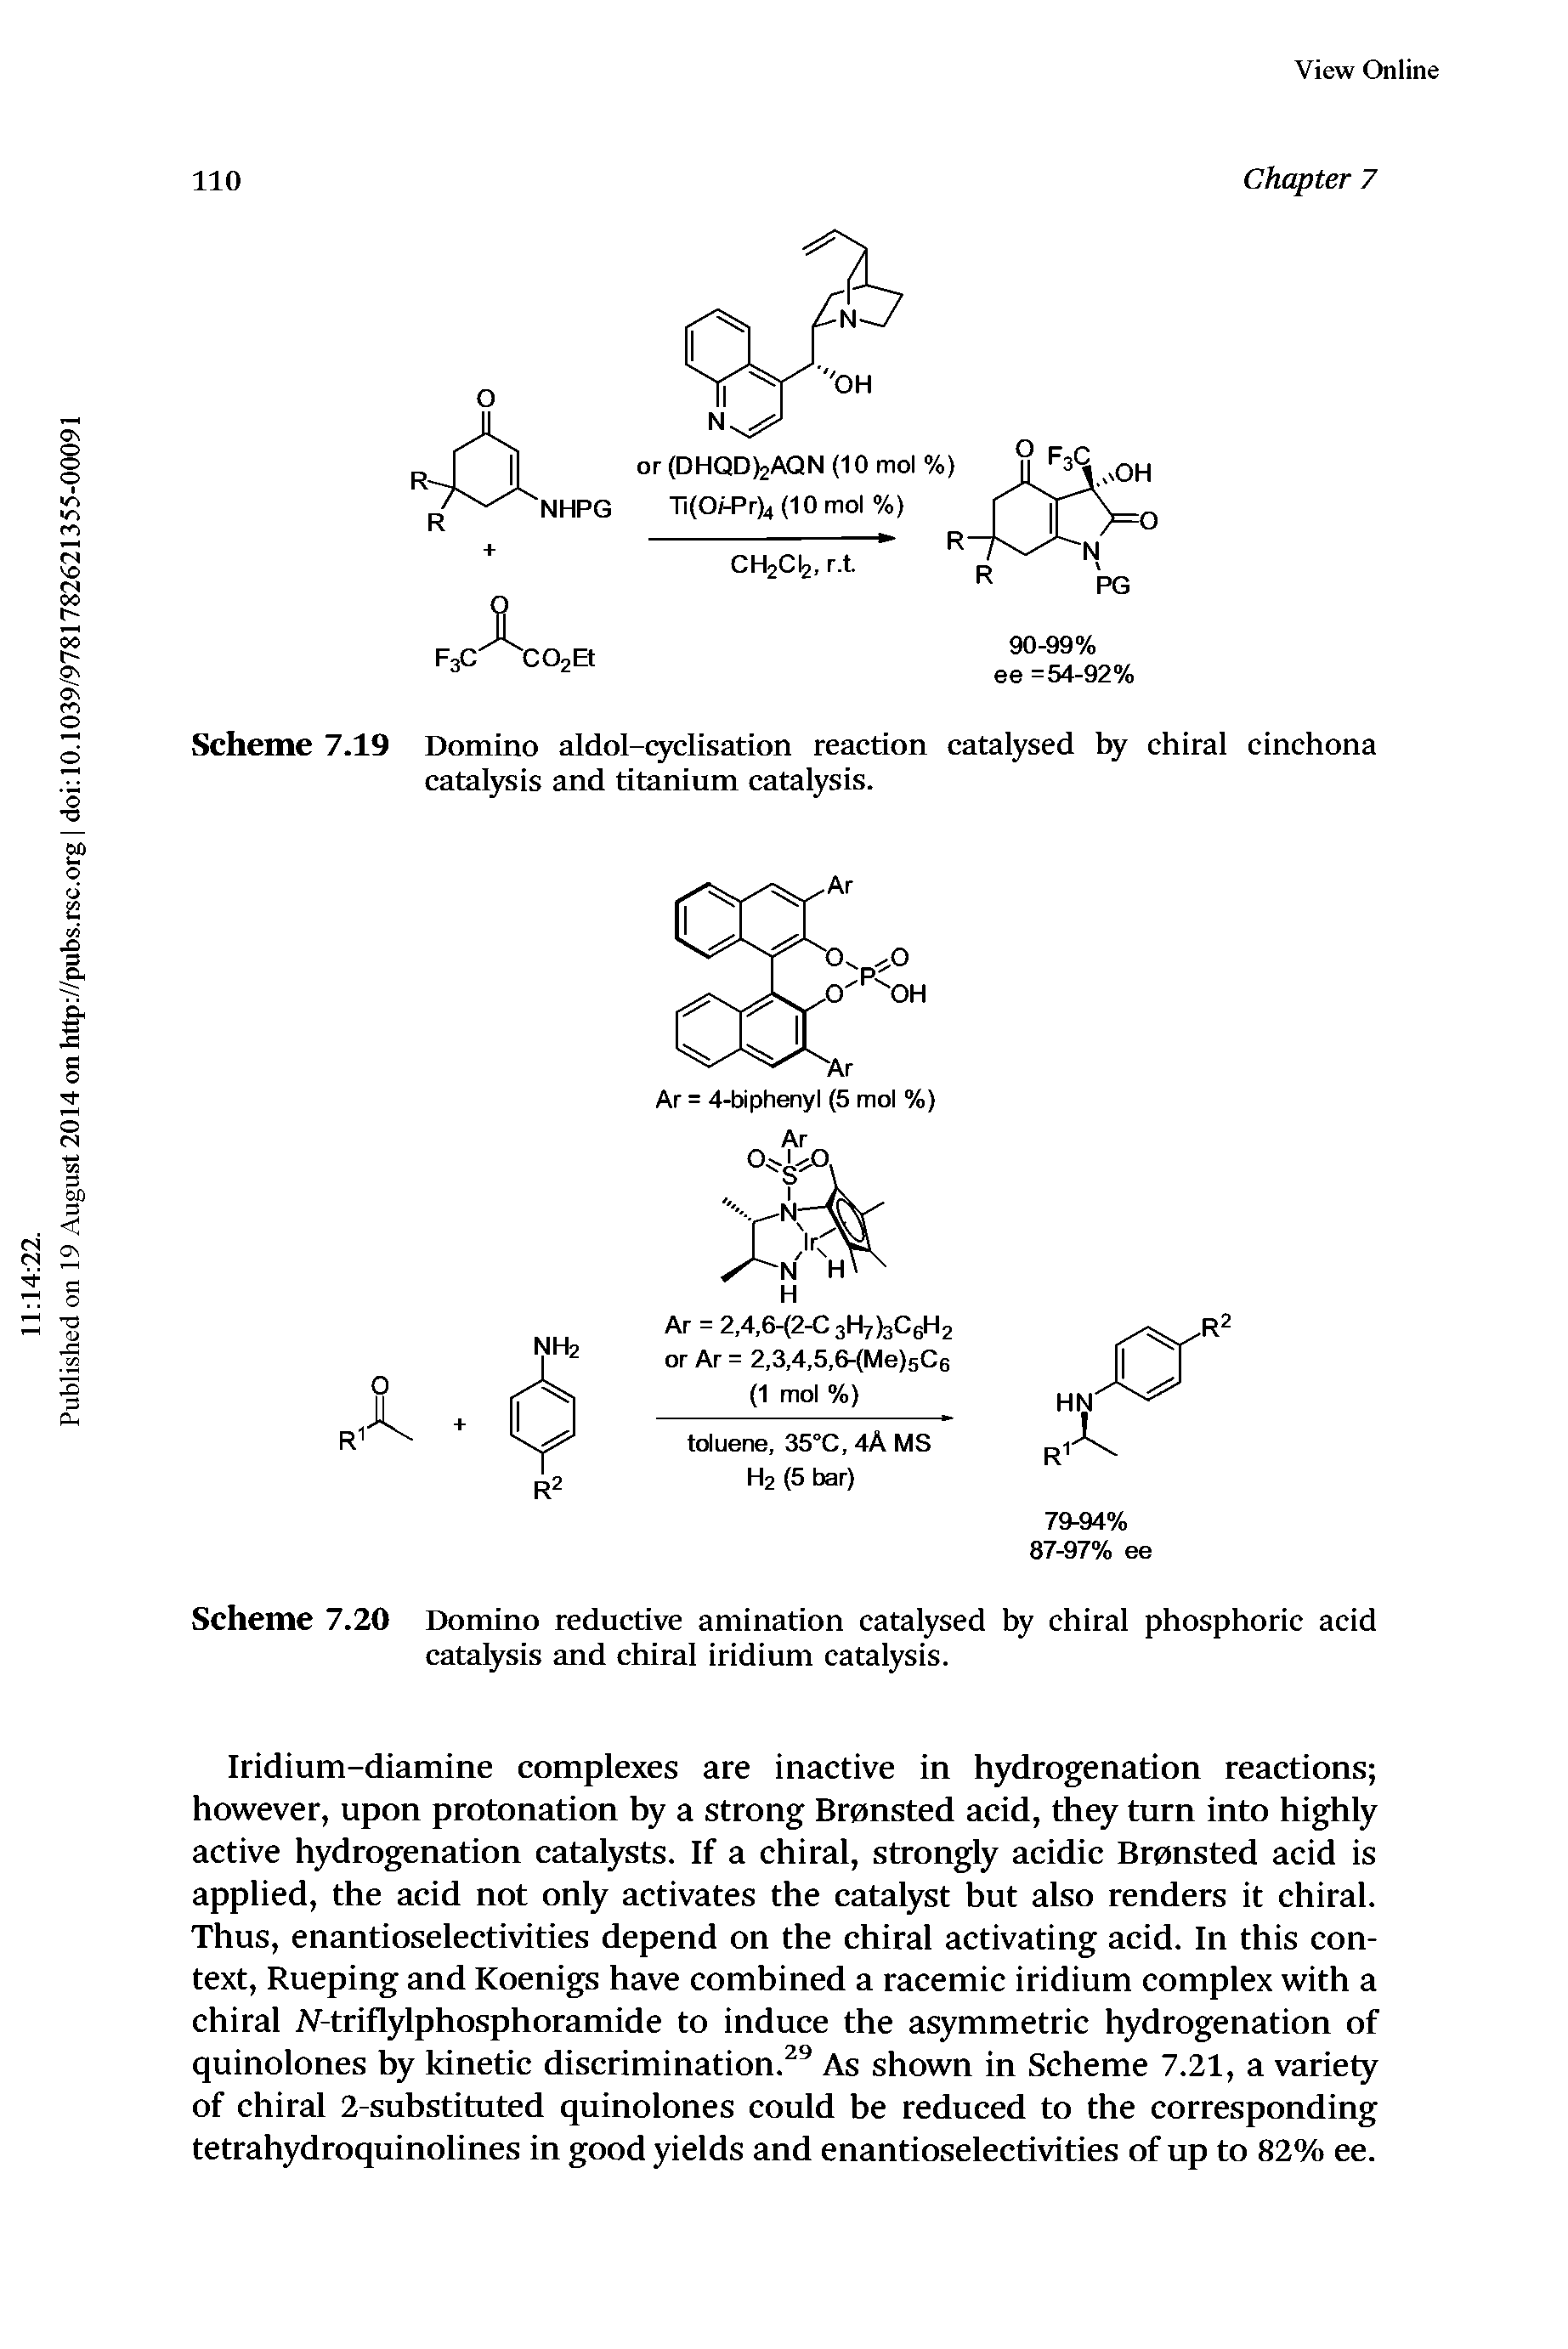 Scheme 7.19 Domino aldol-cyclisation reaction catalysed by chiral cinchona catatysis and titanium catalysis.